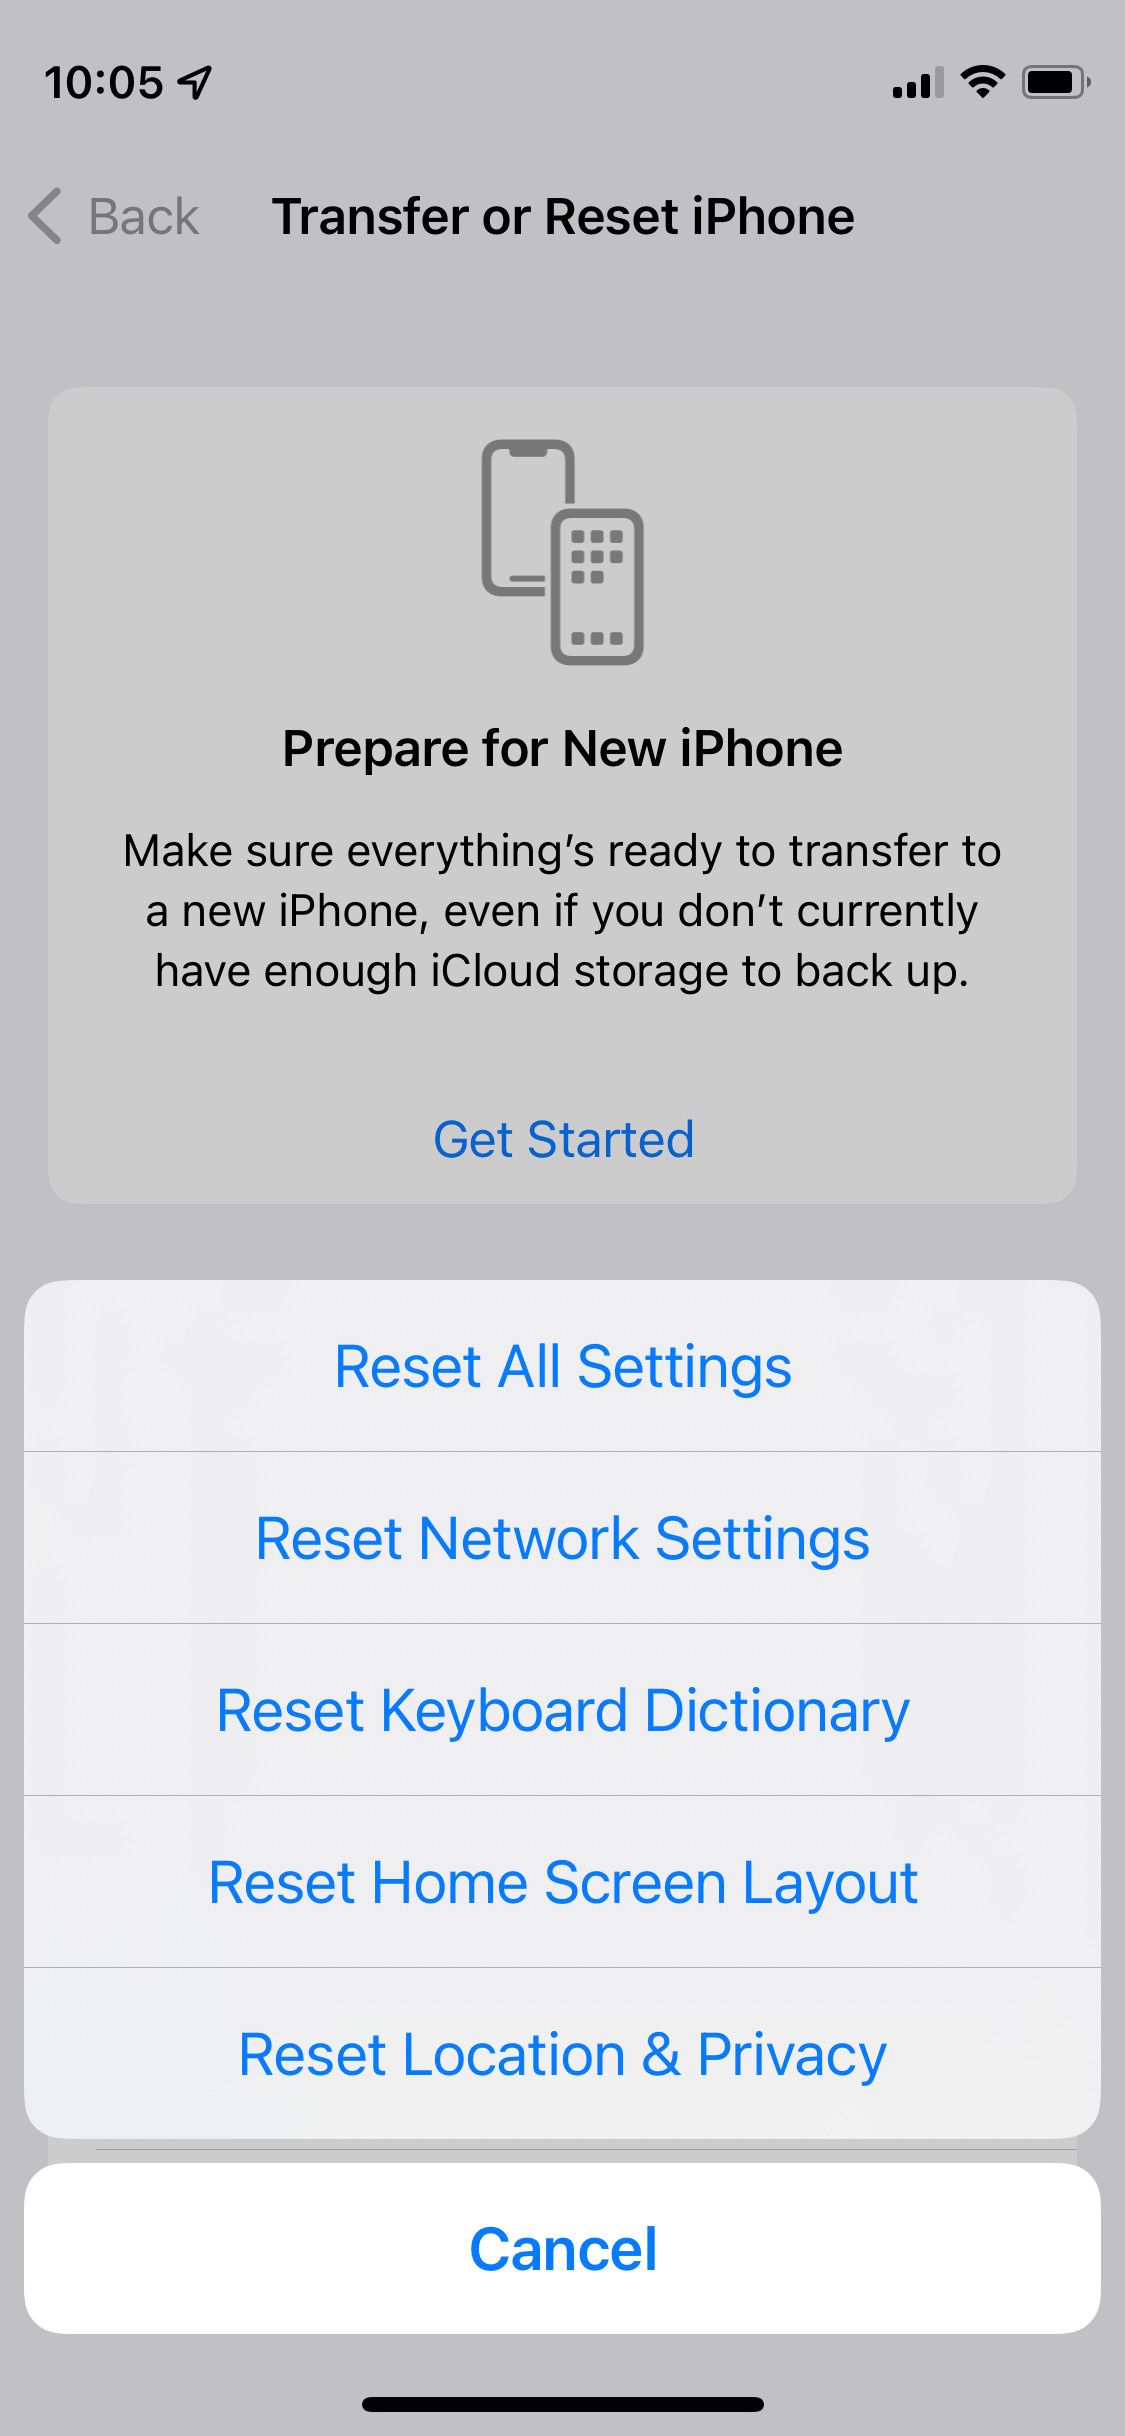 All Reset options on iPhone